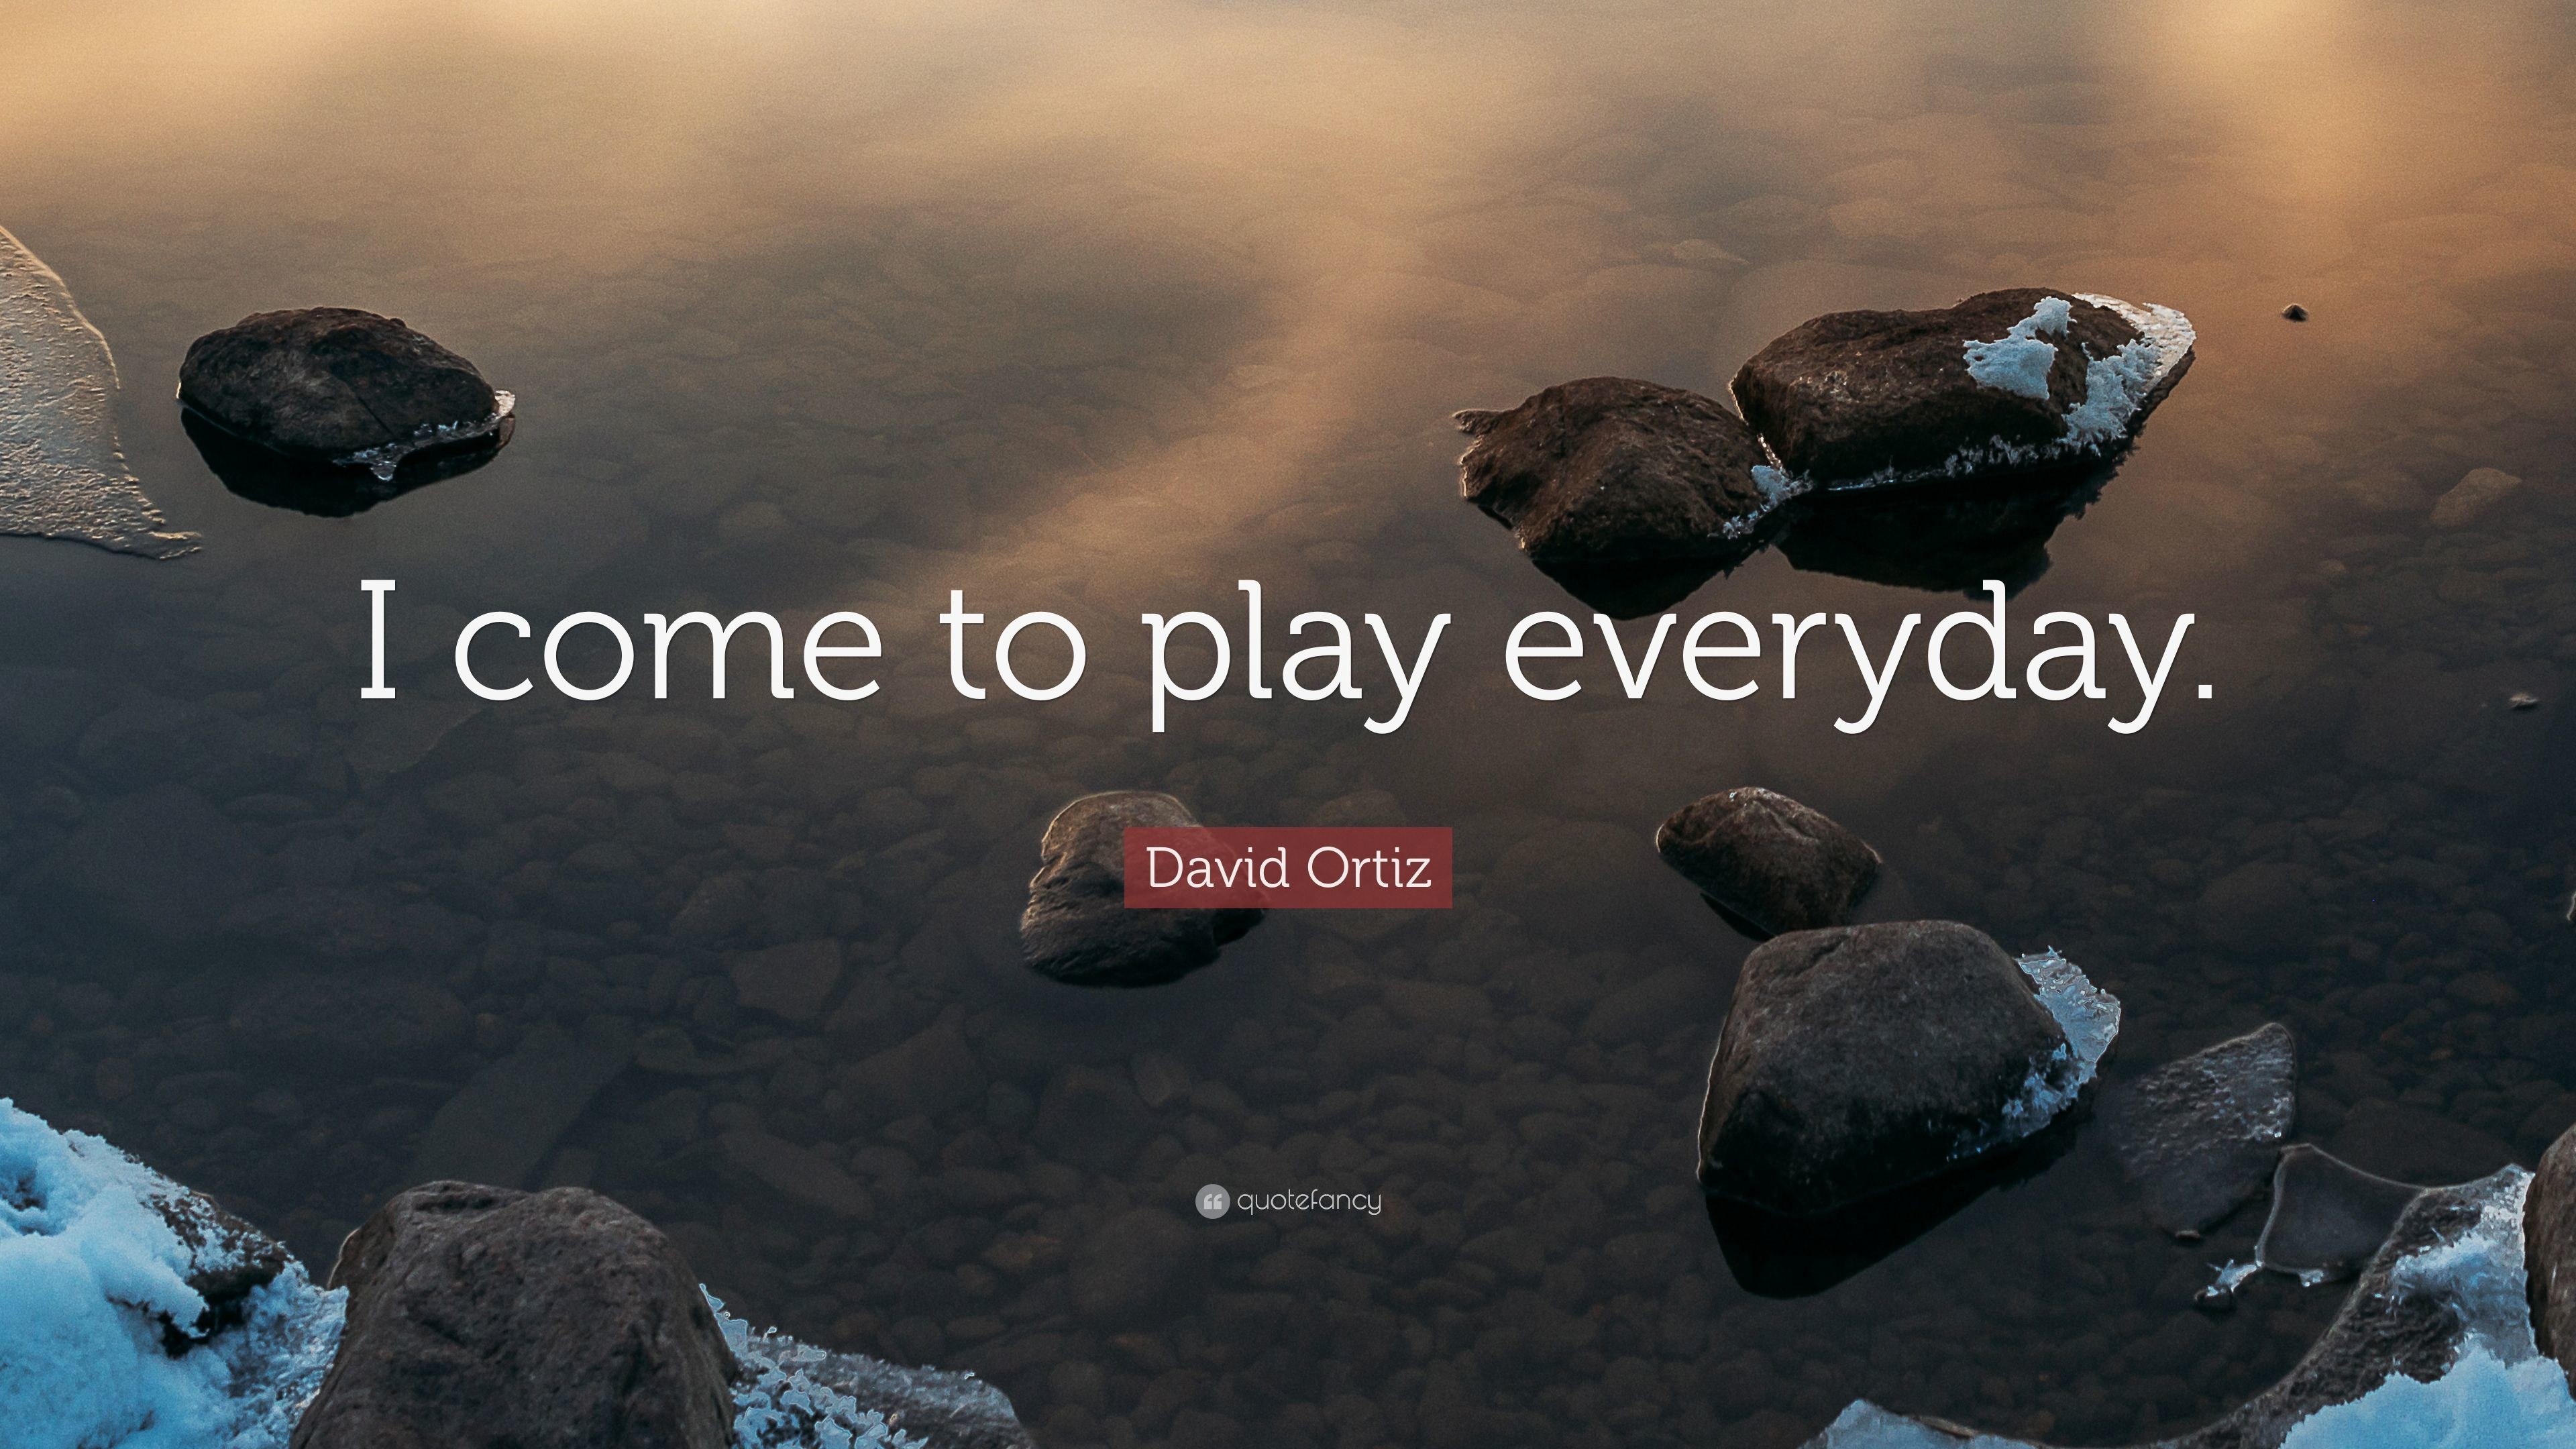 3840x2160 David Ortiz Quote: “I come to play everyday.”